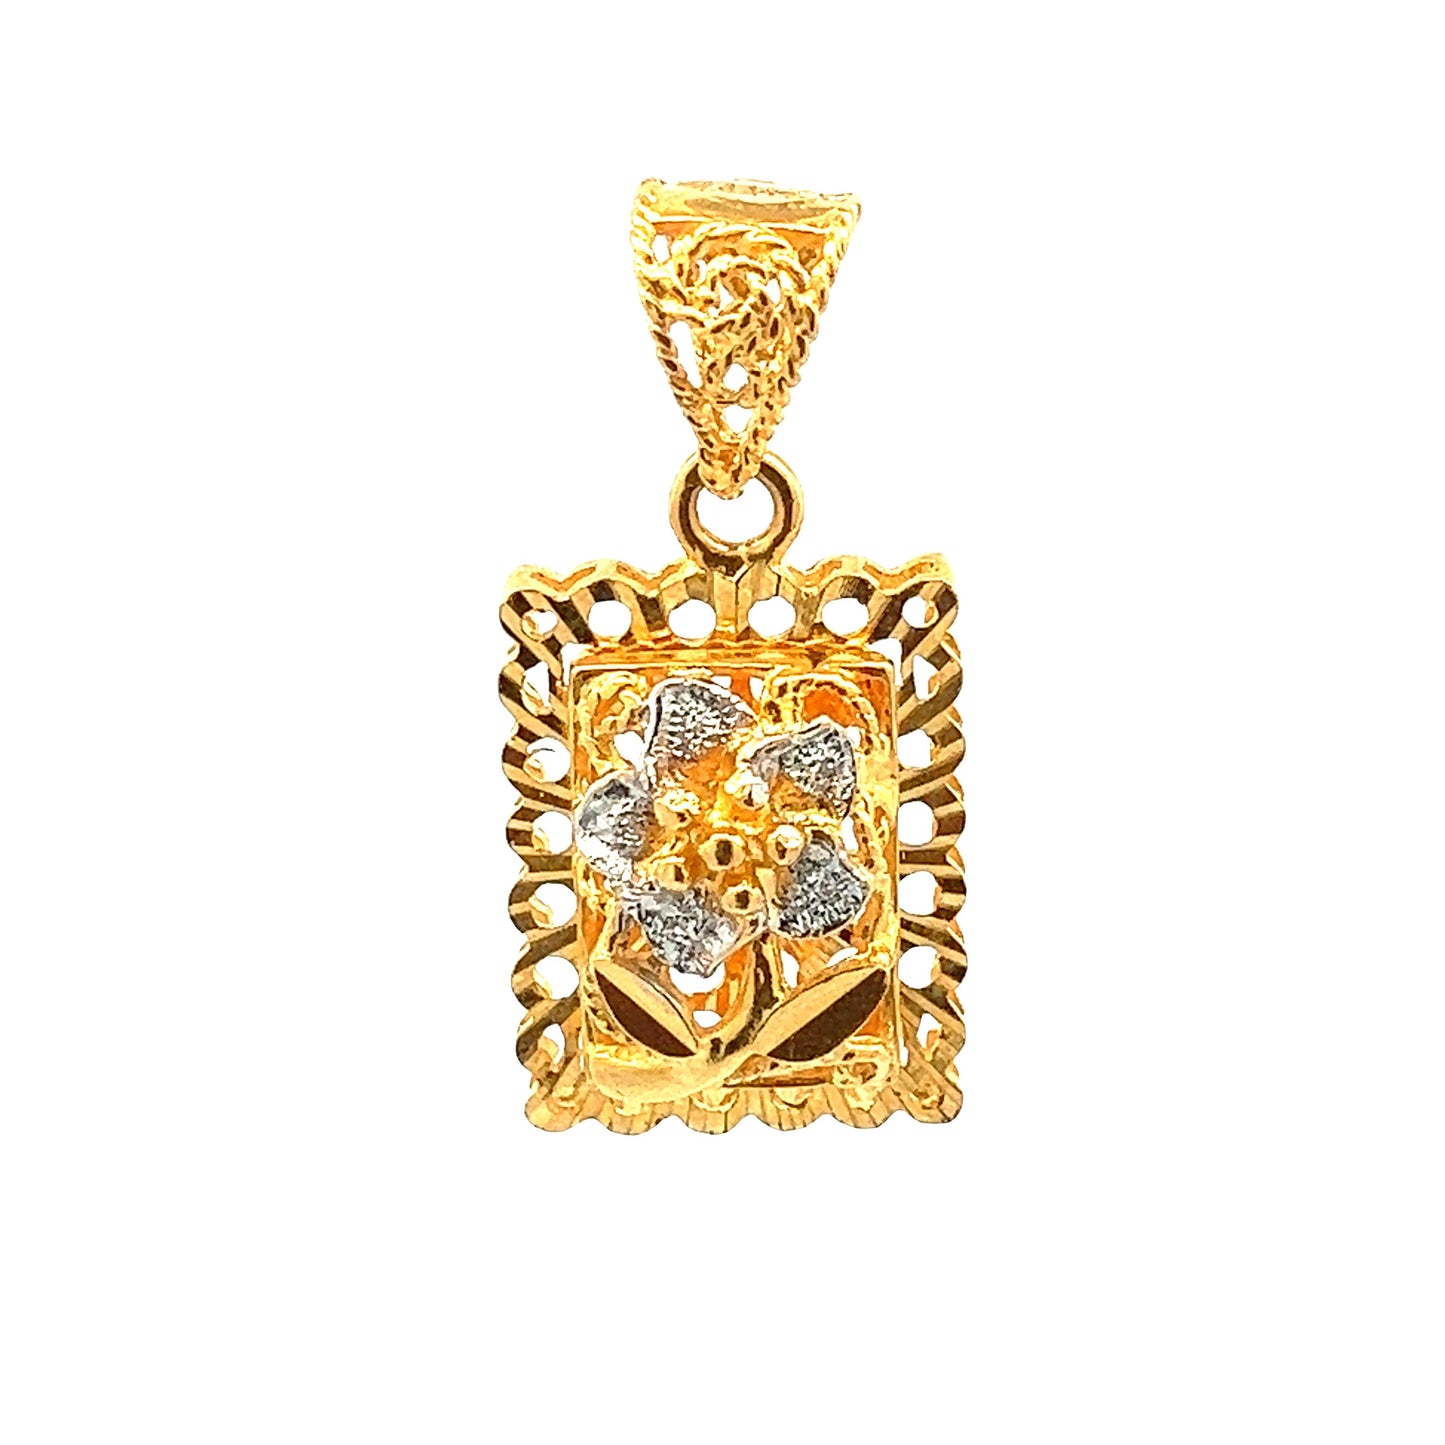 GOLD PENDANT ( 22K ) ( 2.82g ) - 0011795 Chain sold separately